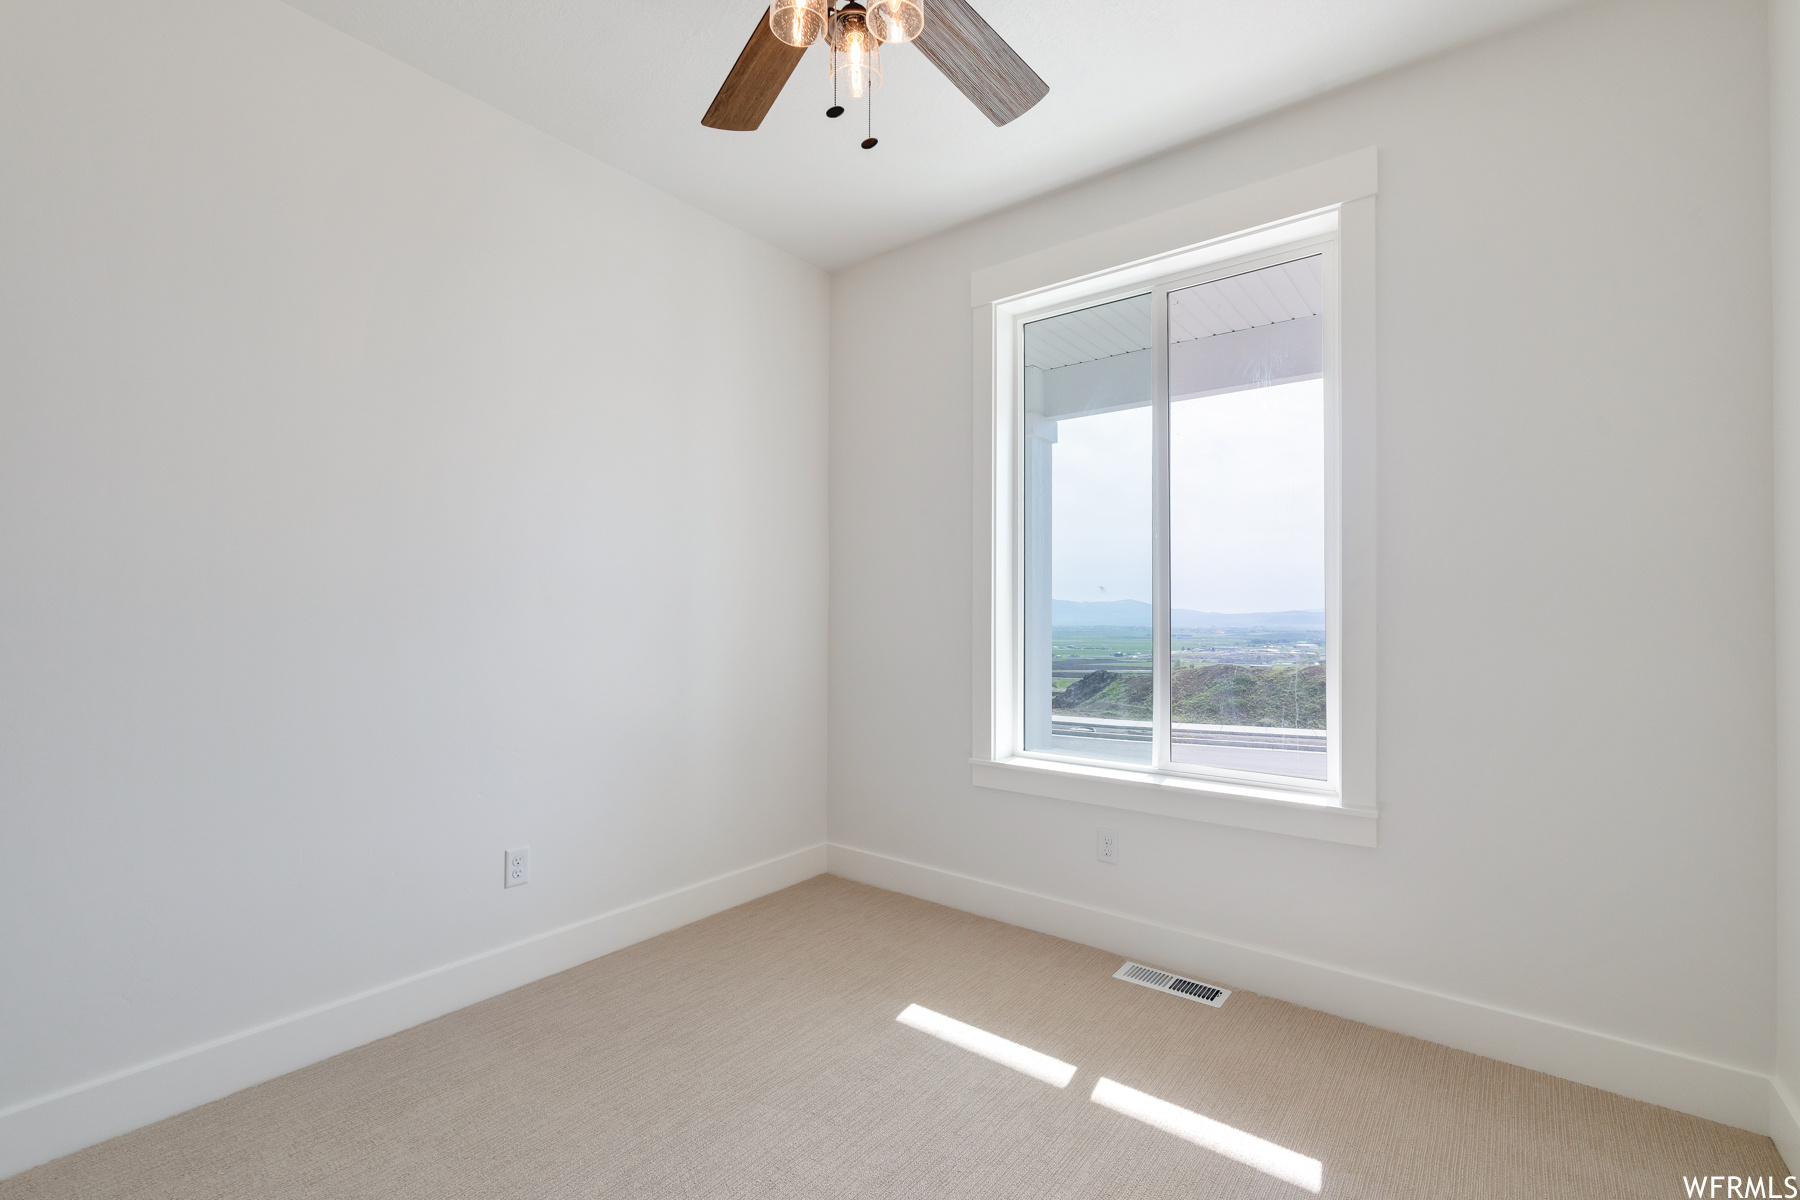 Empty room with natural light, carpet, and a ceiling fan